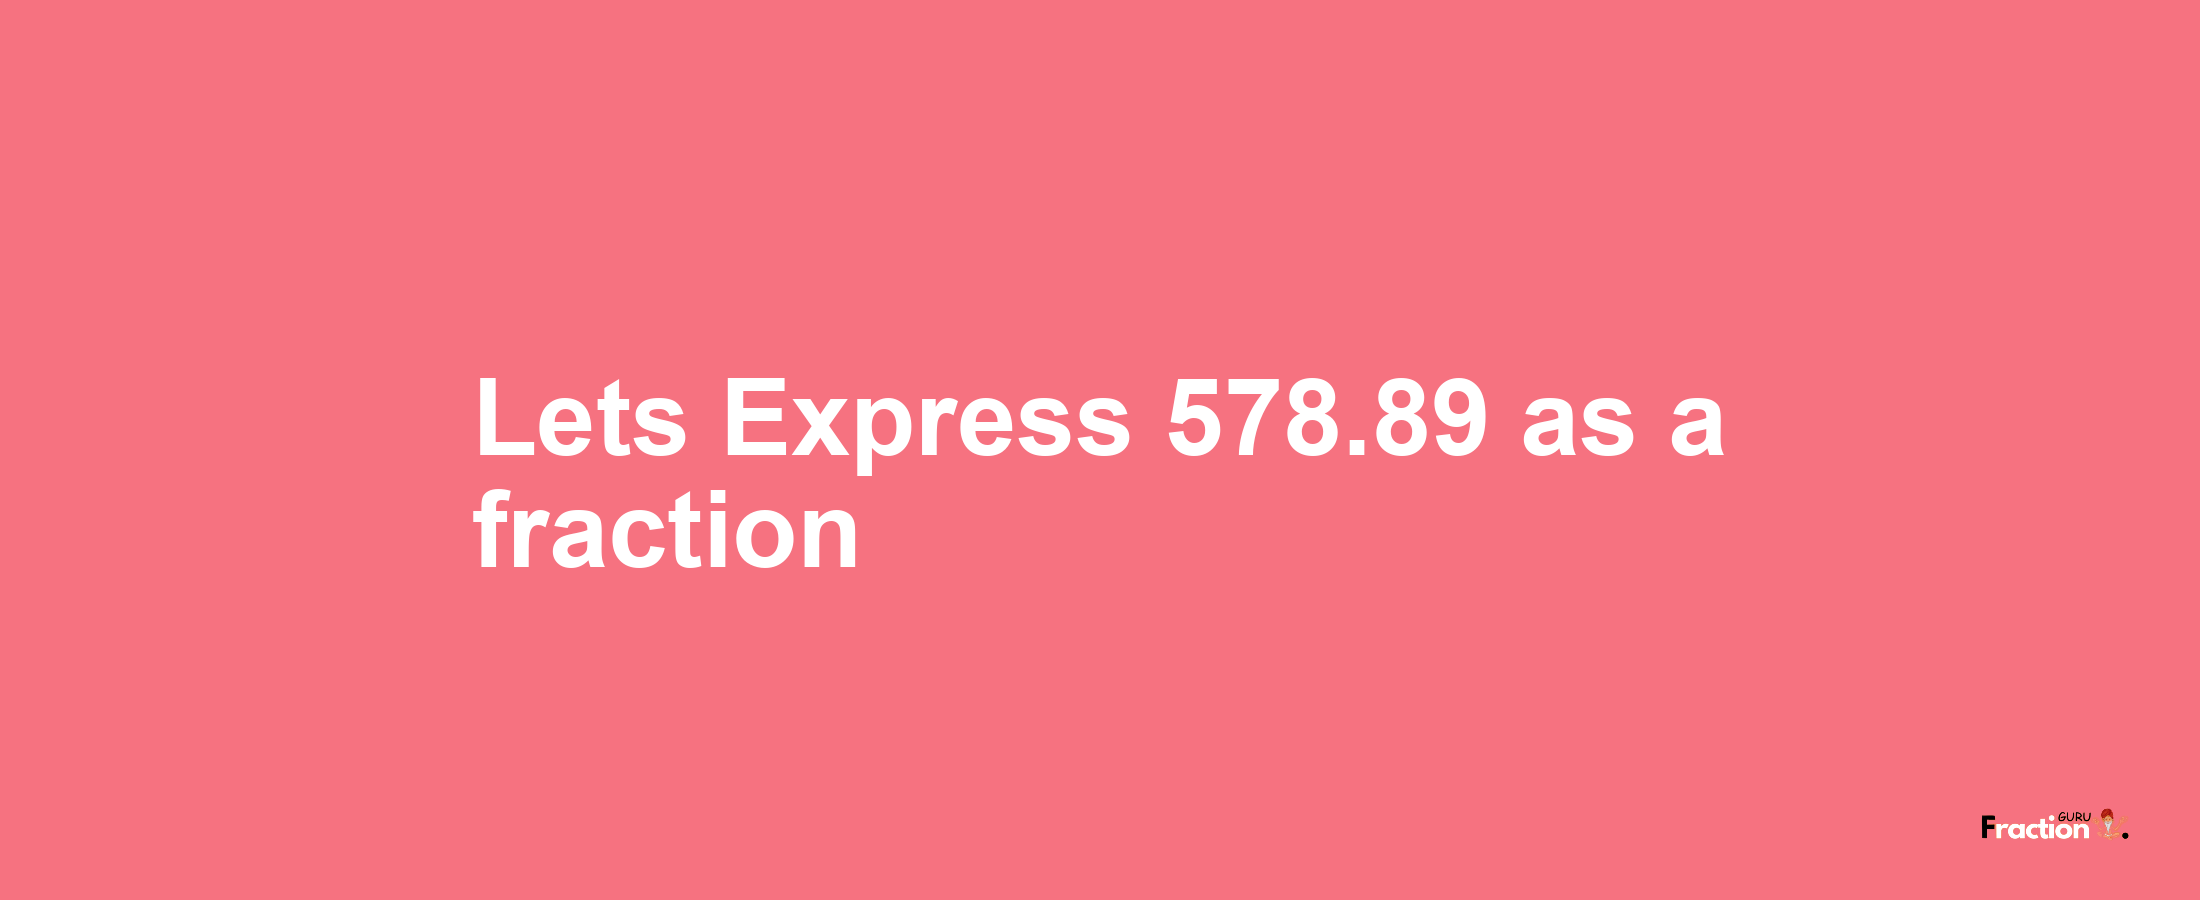 Lets Express 578.89 as afraction